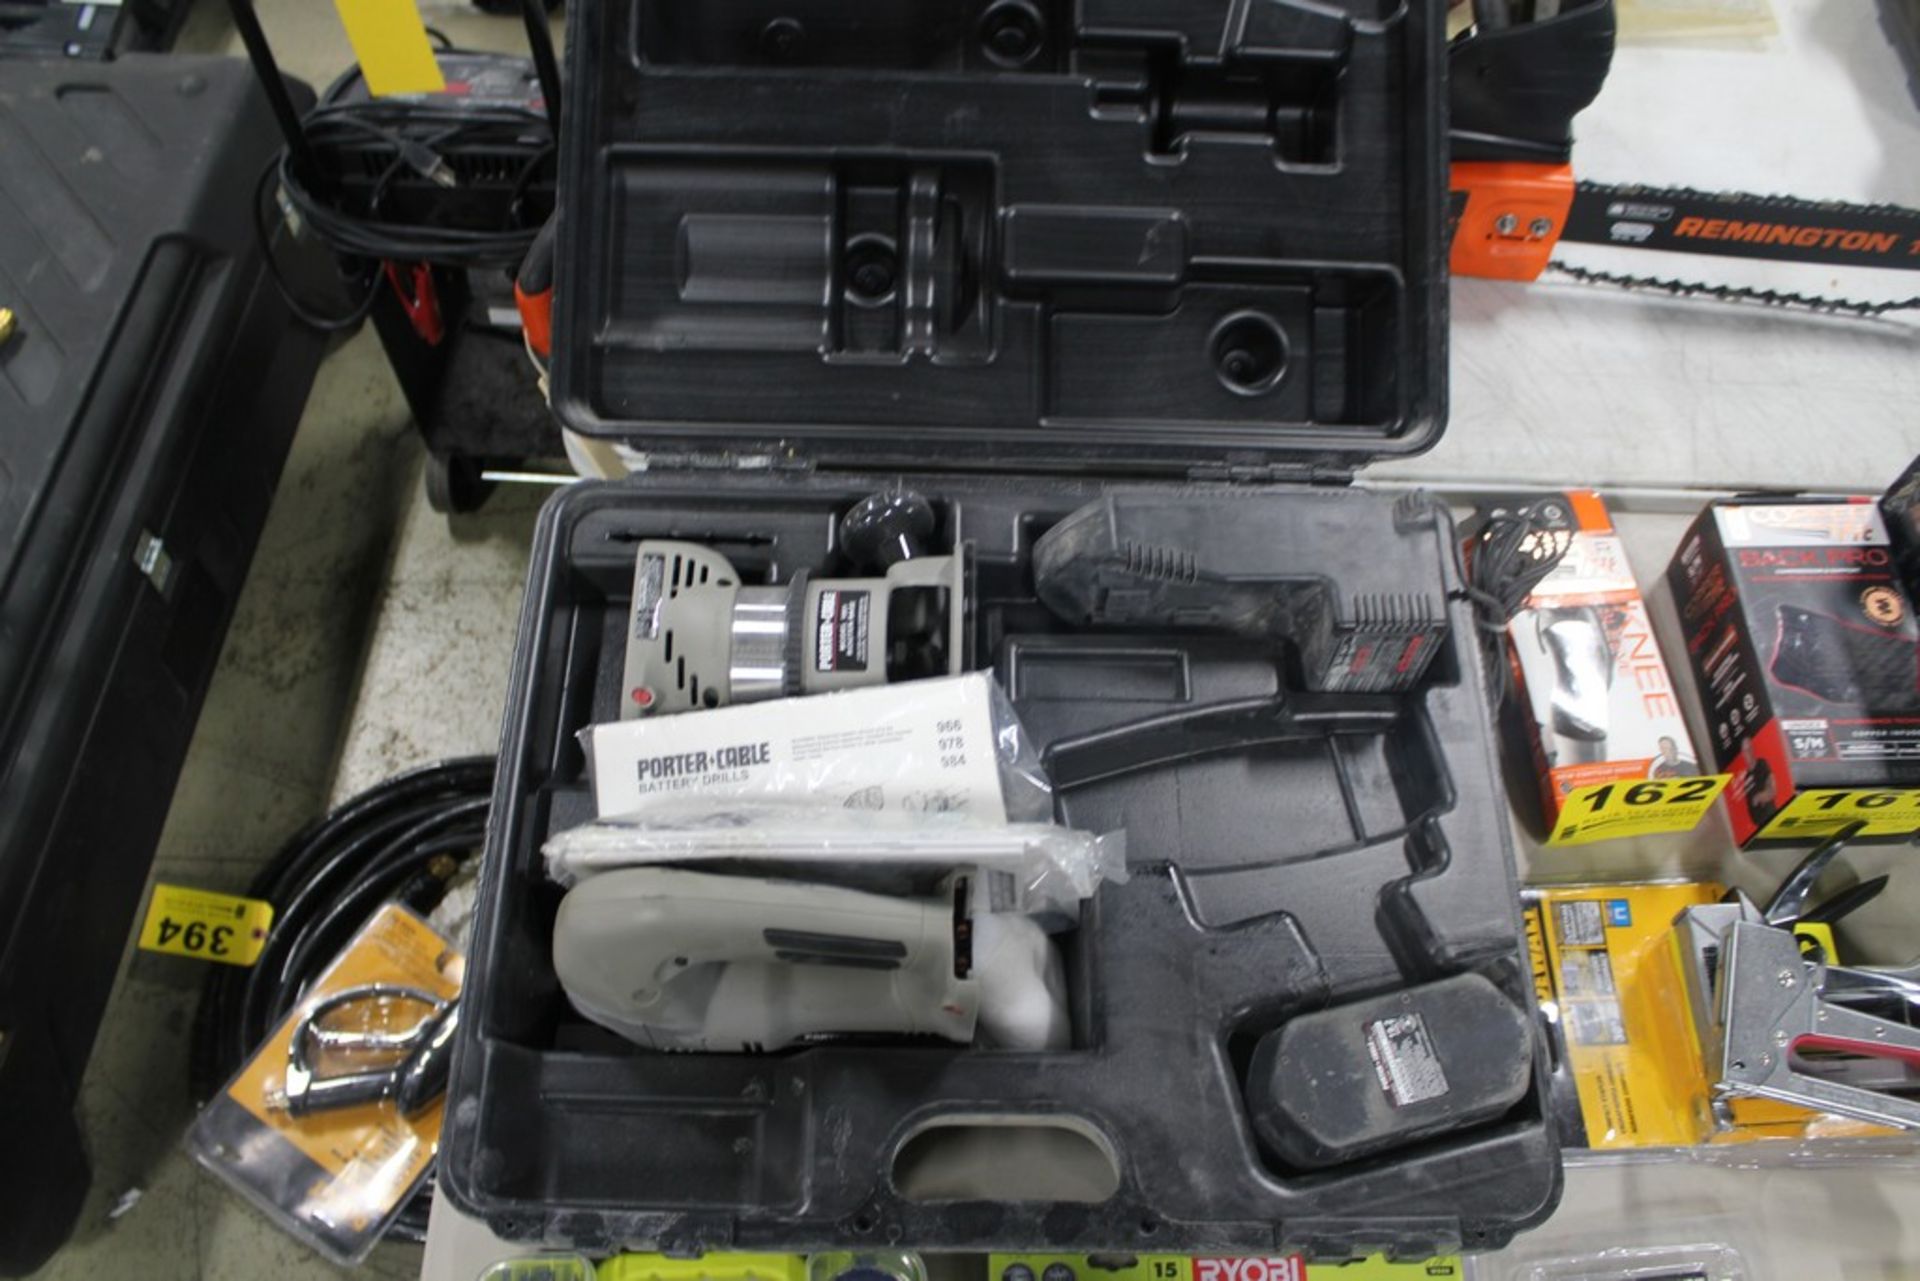 PORTER-CABLE CORDLESS TOOLSET, INCLUDING MODEL 1001 ROUTER BASE AND MODEL 643 JIGSAW, IN CASE WITH